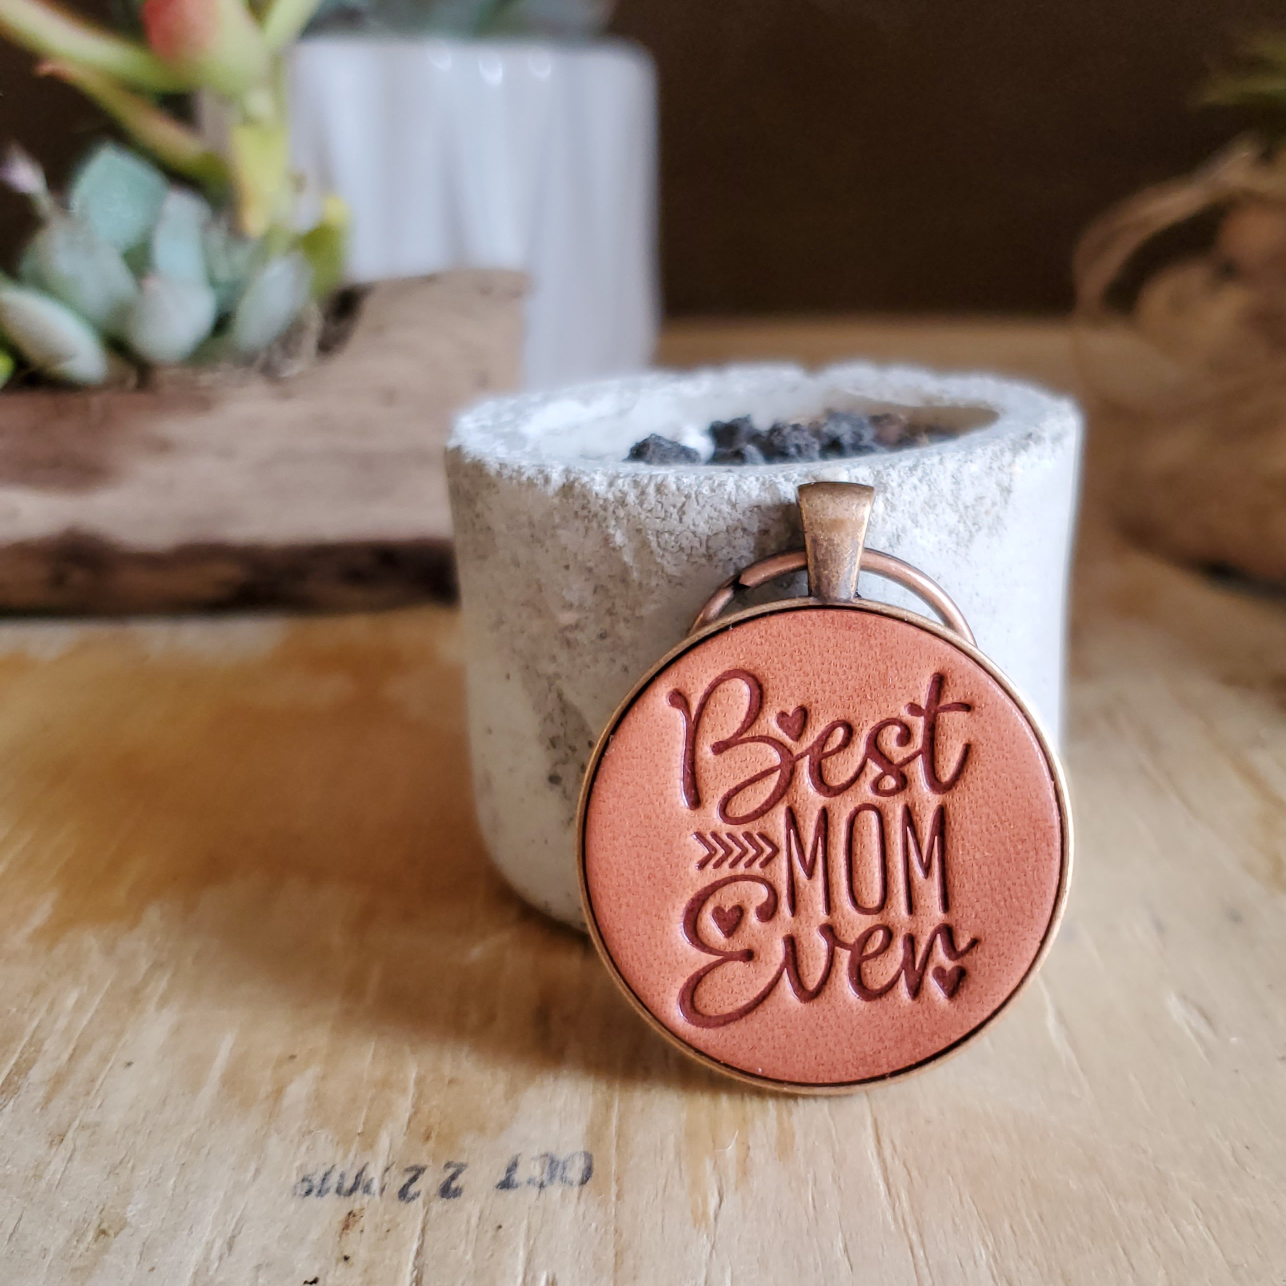 Hand stamped leather keychain that says Best Mom Ever that has been mounted in a round metal pendant with a 1 inch antique copper keyring. This keychain is made using veg tanned Wickett & Craig leather.